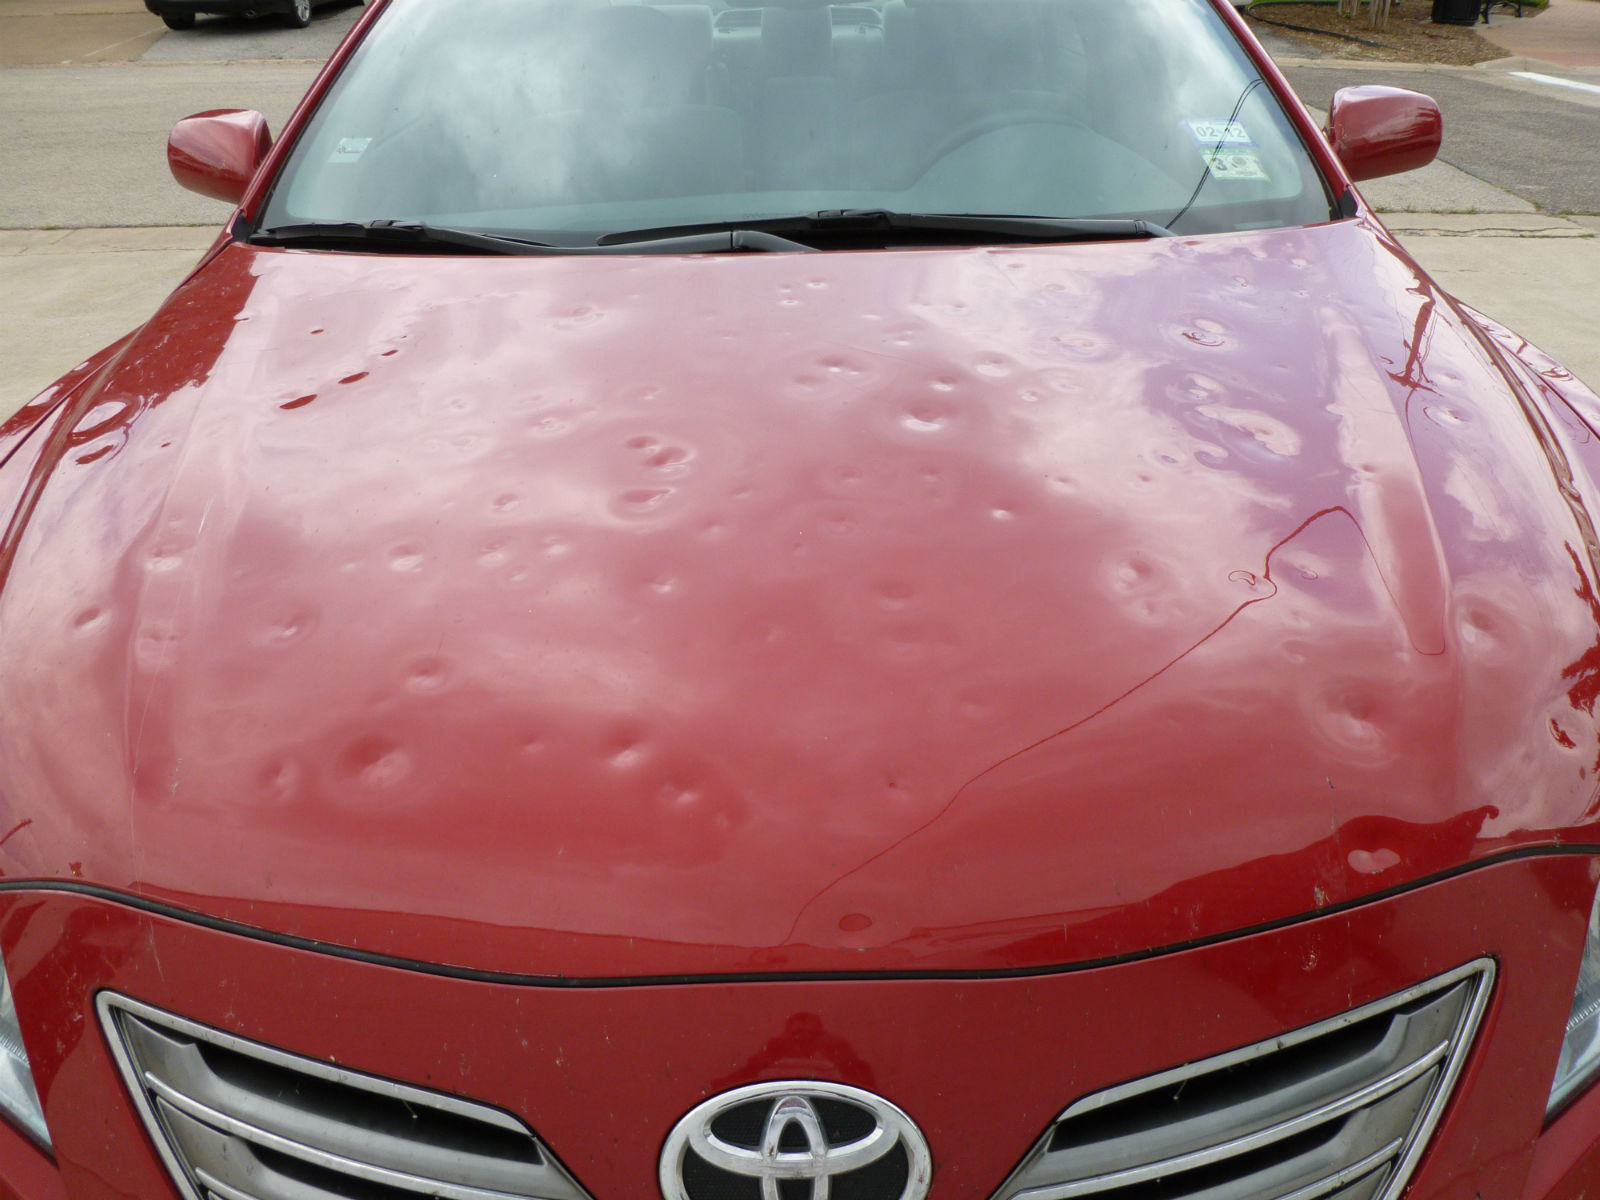 Did Your Insurance Company Lowball Your Hail Repair Estimate? - Dent Biz - Paintless Dent & Hail 